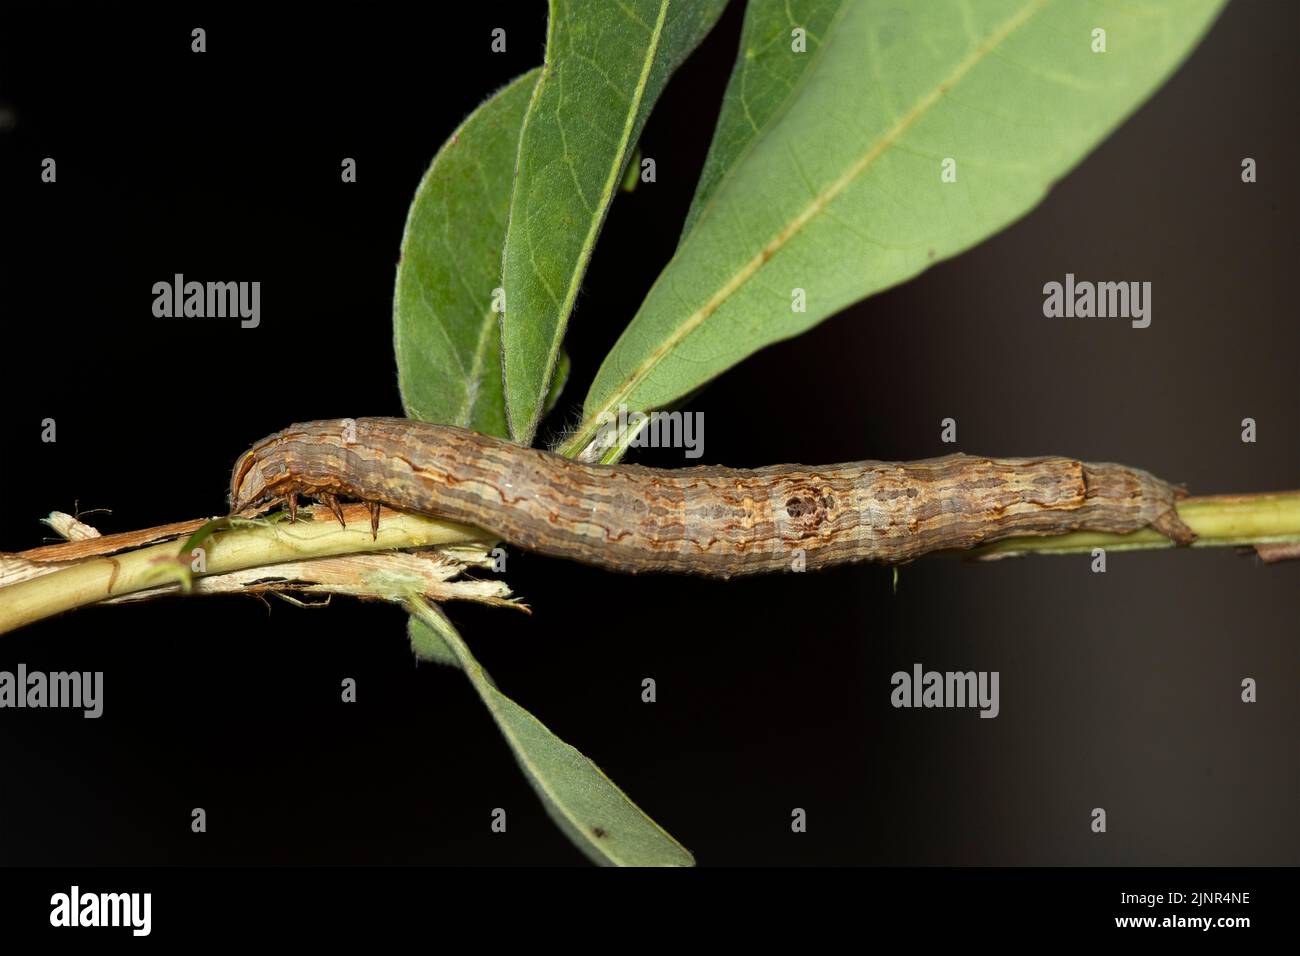 The superb cryptic camouflage of this Geometrid Moth caterpillar makes it look just like a piece of twig or bark, Stock Photo